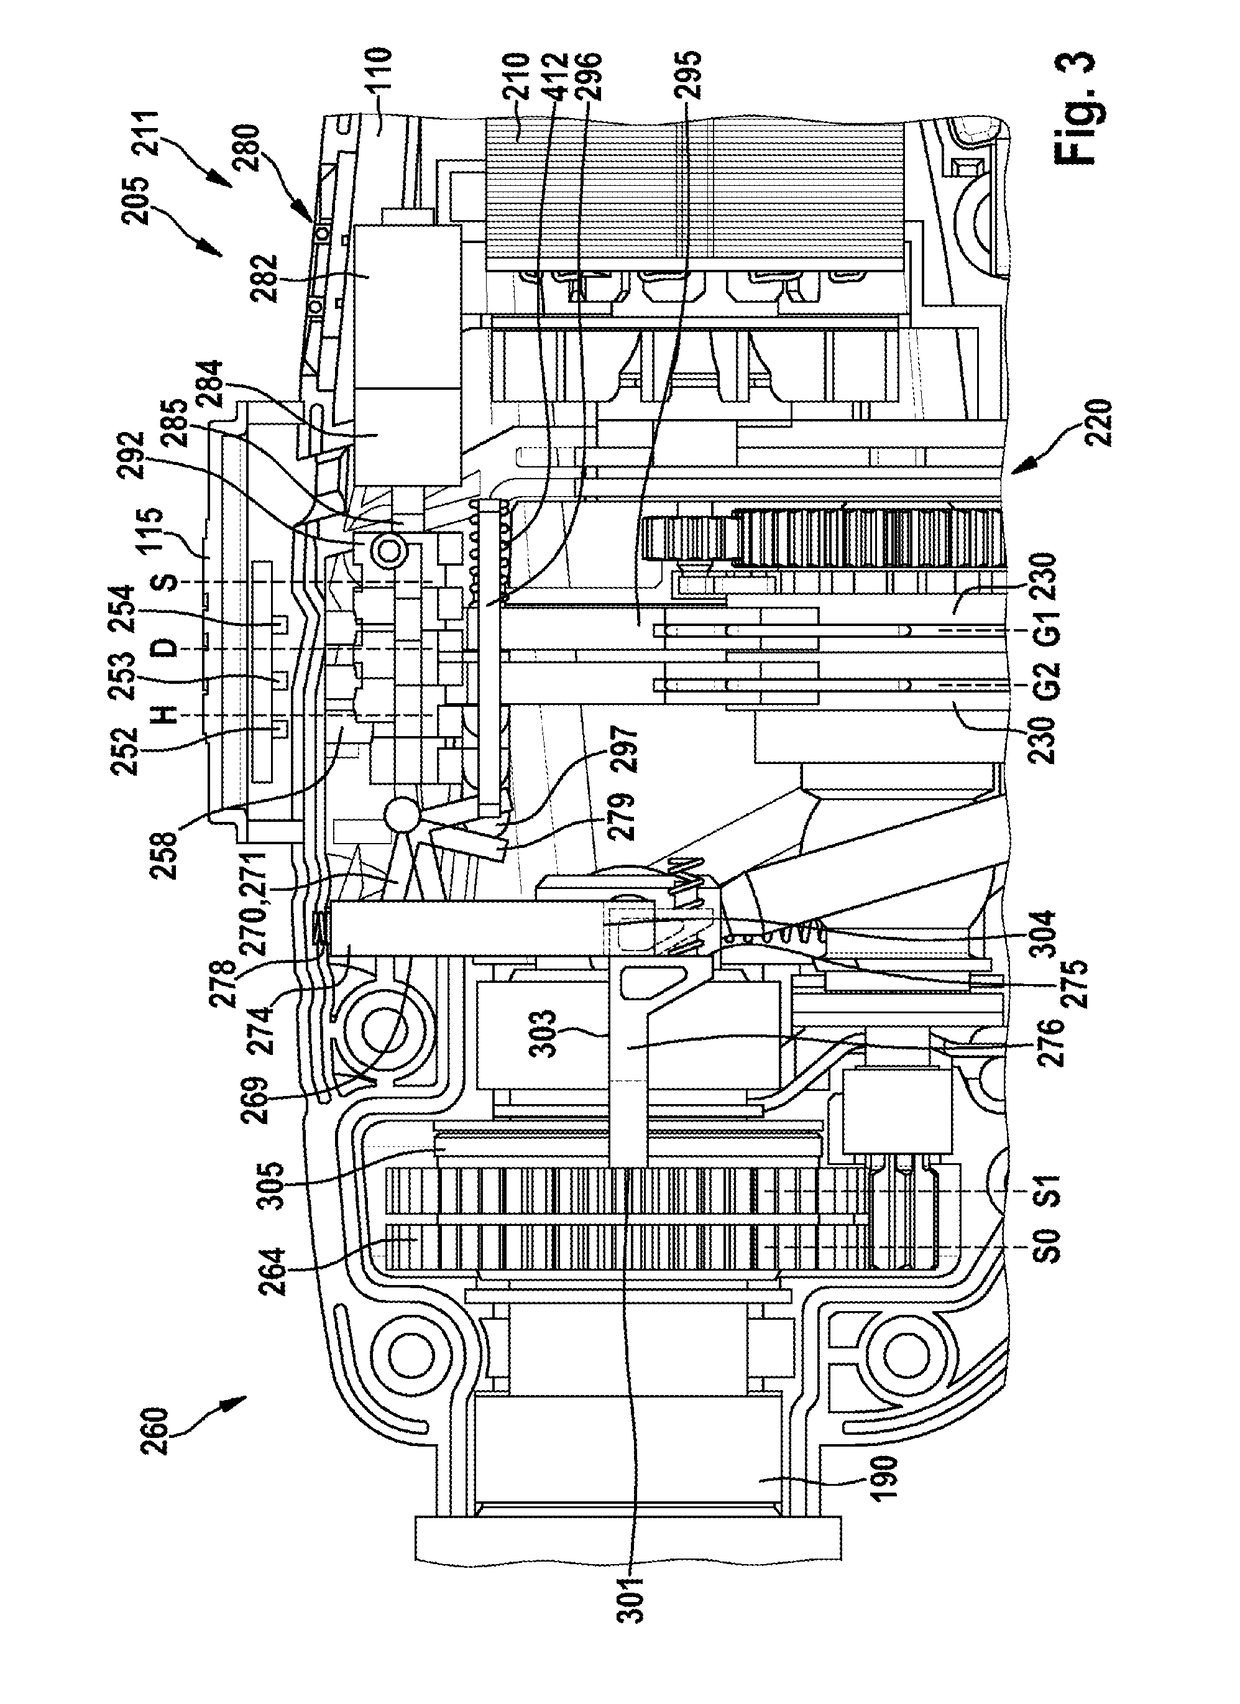 Hand-Held Power Tool Comprising a Communication Interface